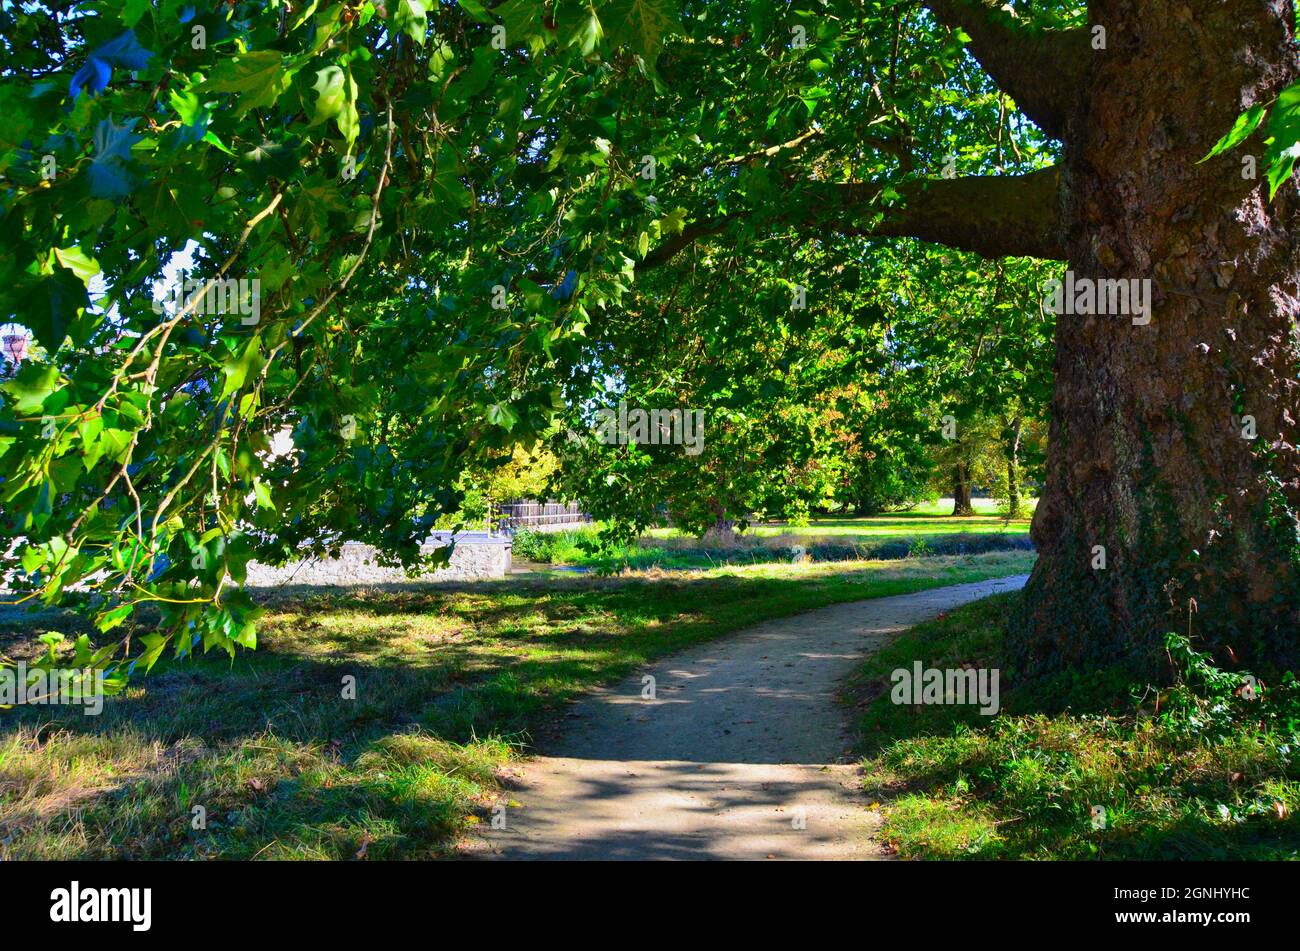 Parc of Ermenonville in the oise area in france Stock Photo